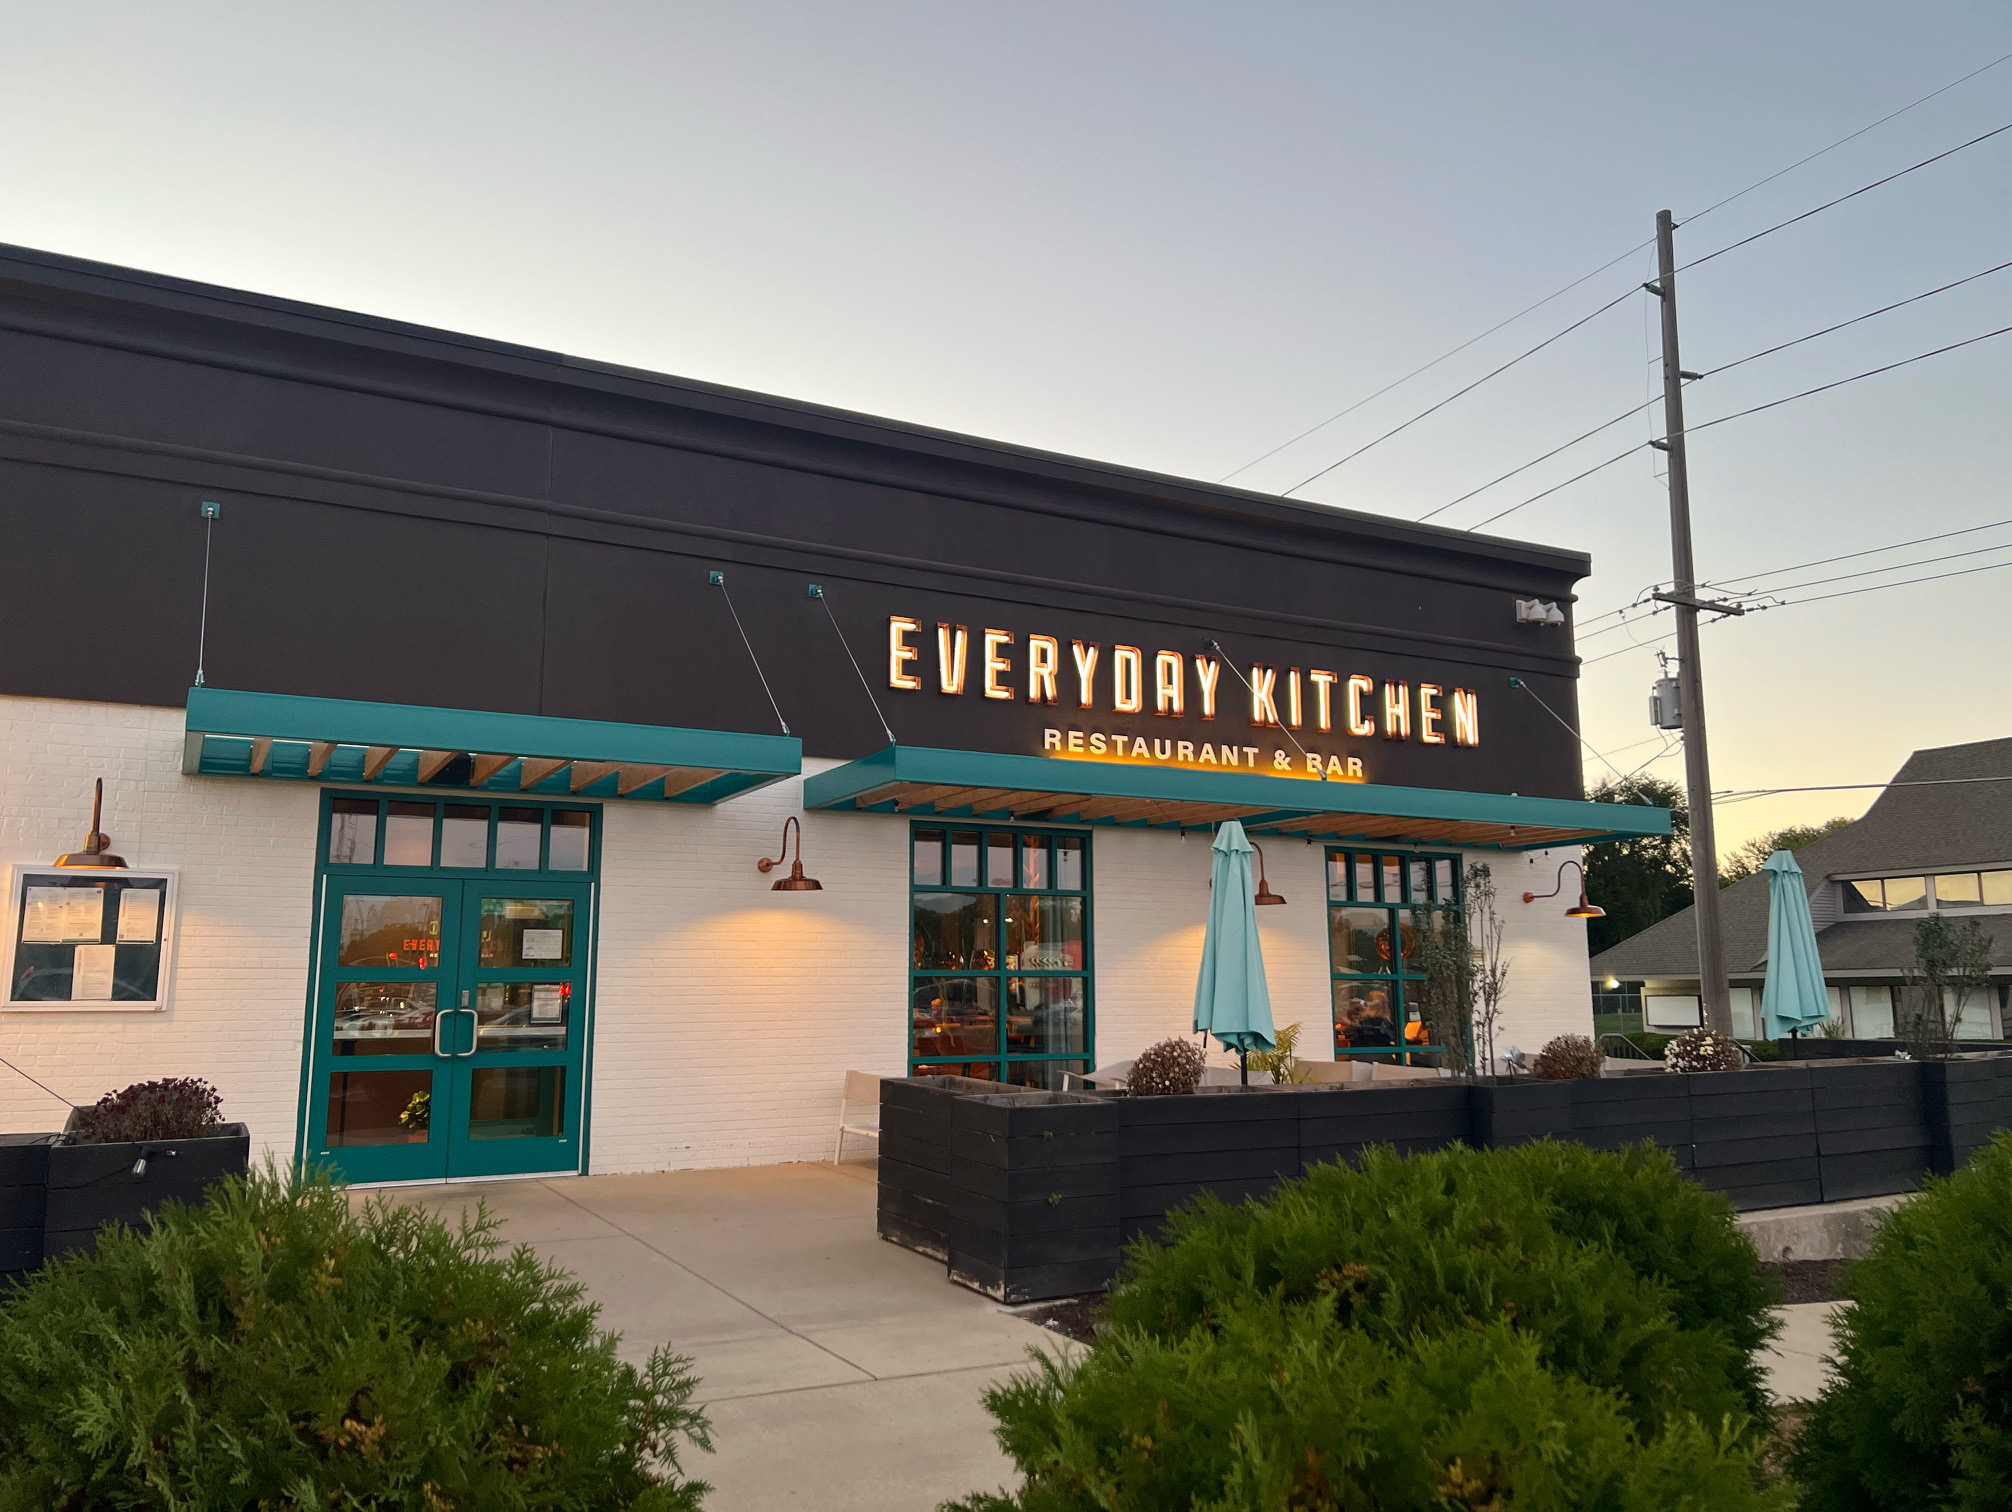 The exterior of Everyday Kitchen Restaurant in Champaign. Photo by Alyssa Buckley.